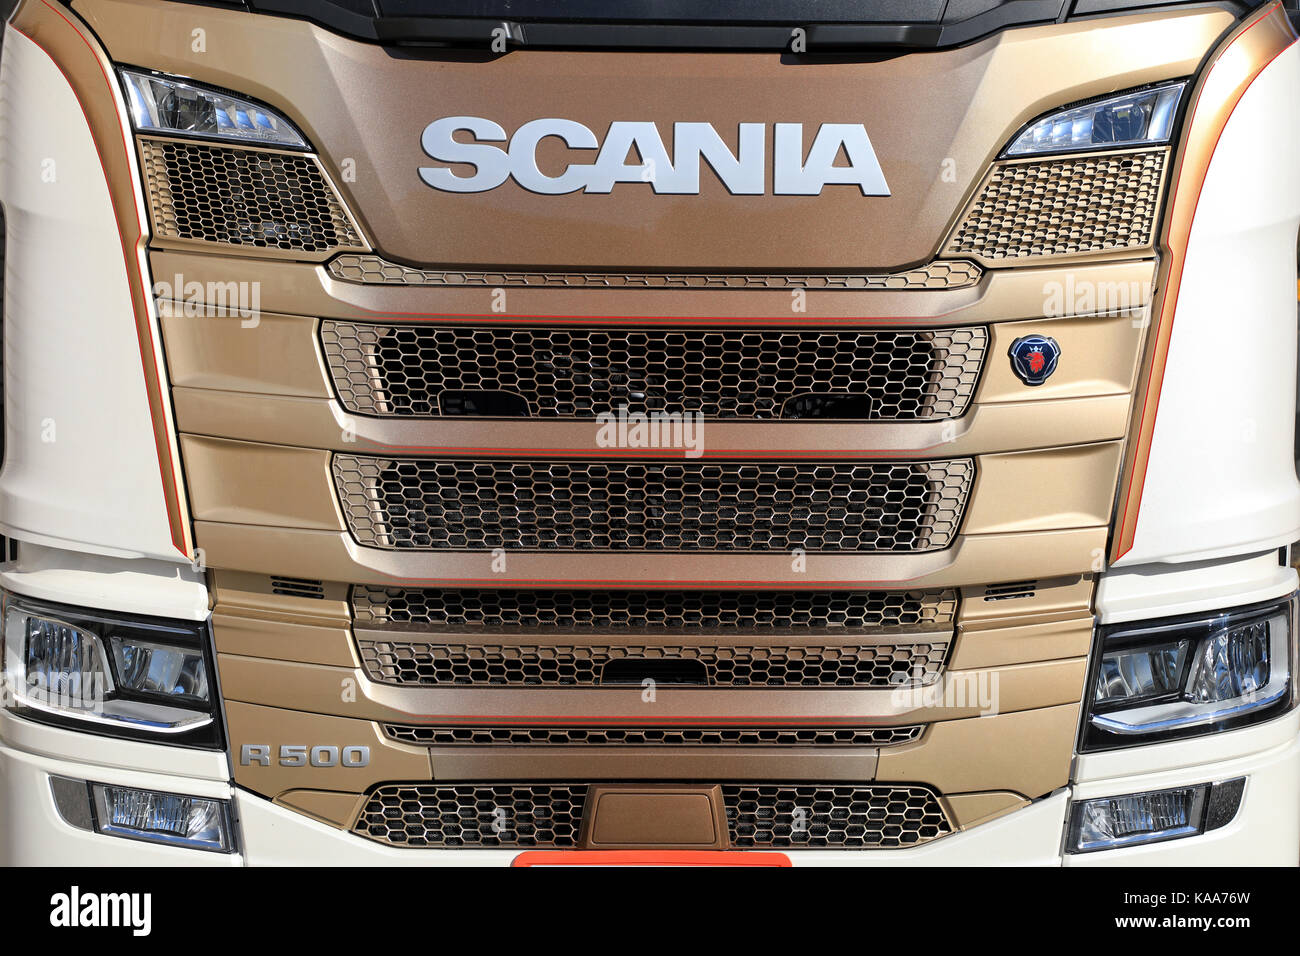 FORSSA, FINLAND - MAY 1, 2017: Detail of Next Generation Scania R500 semi truck front in colors of cream and bronze. Stock Photo